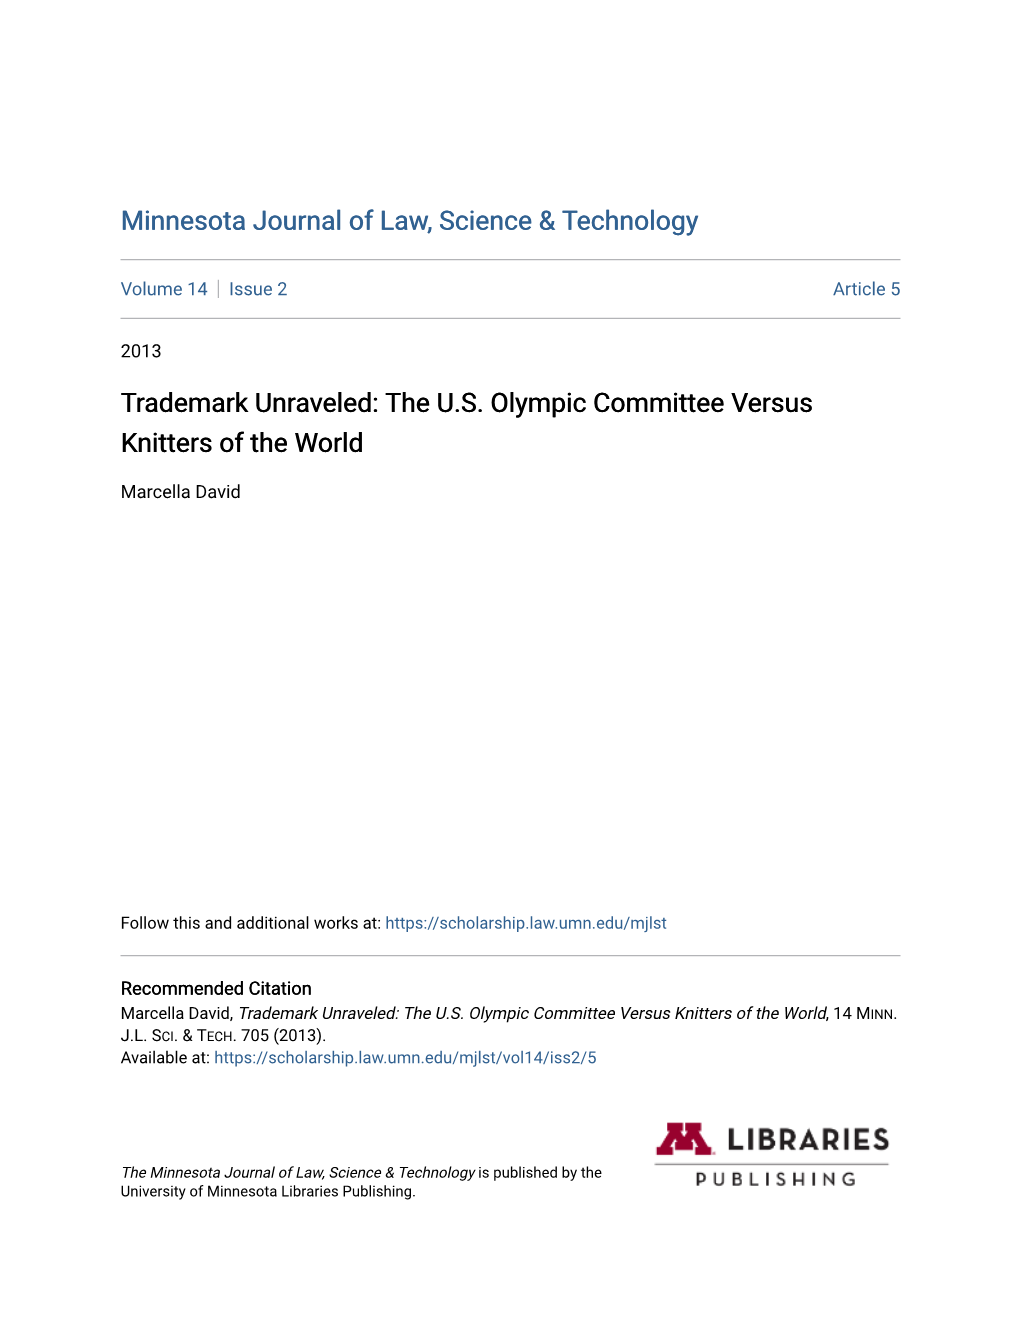 Trademark Unraveled: the U.S. Olympic Committee Versus Knitters of the World